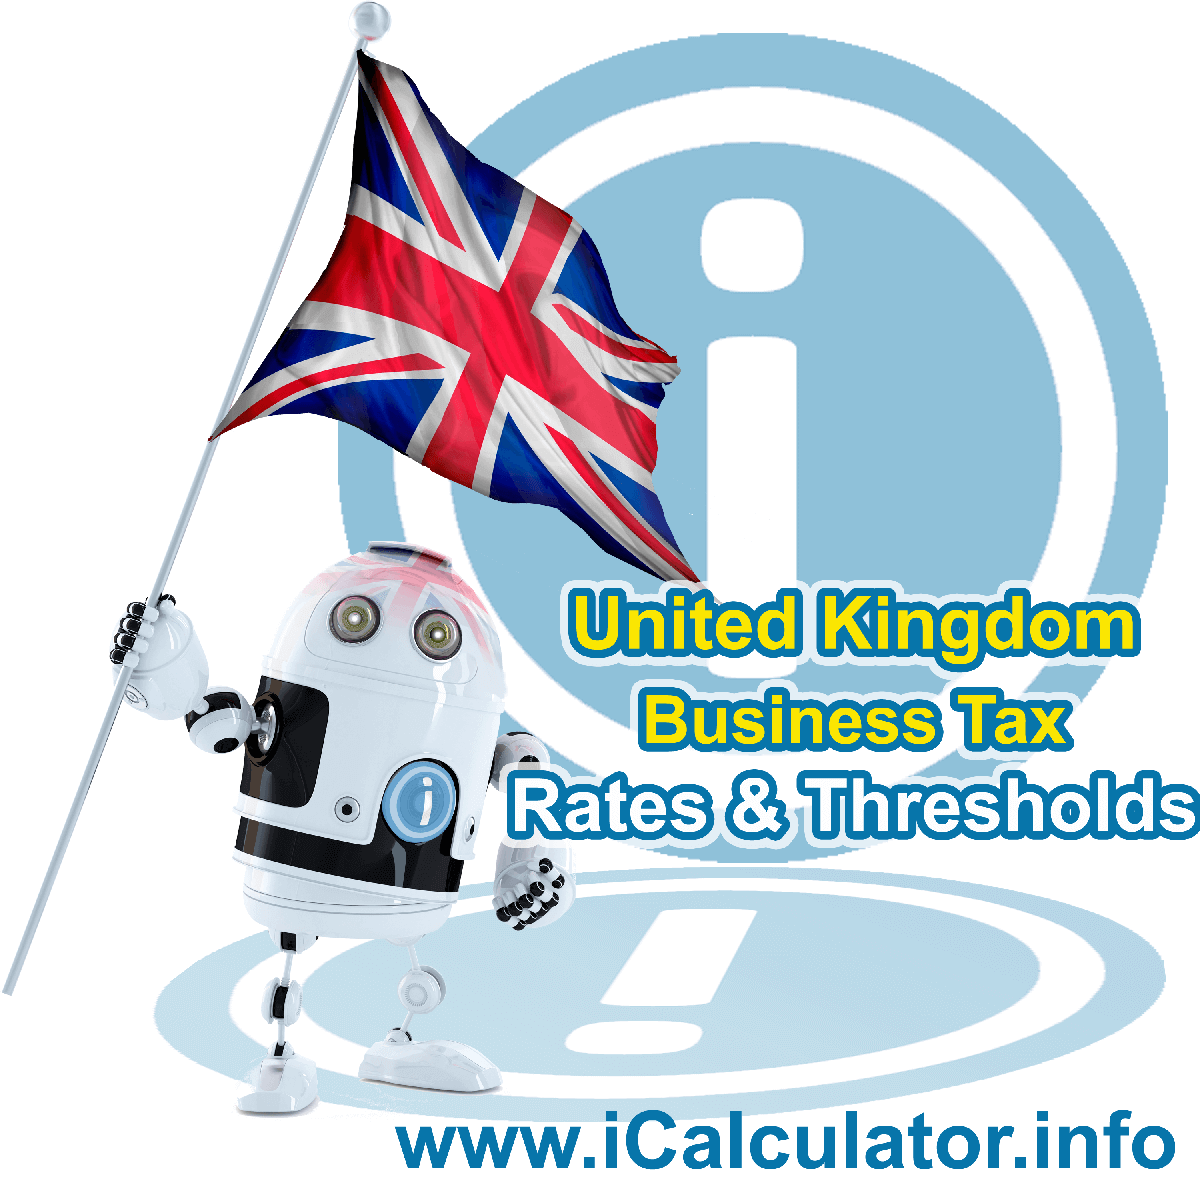 United Kingdom Corporation Tax Rates in 2019. This image shows the United Kingdom flag and information relating to the corporation tax formula for the United Kingdom Corporation Tax Calculator in 2019